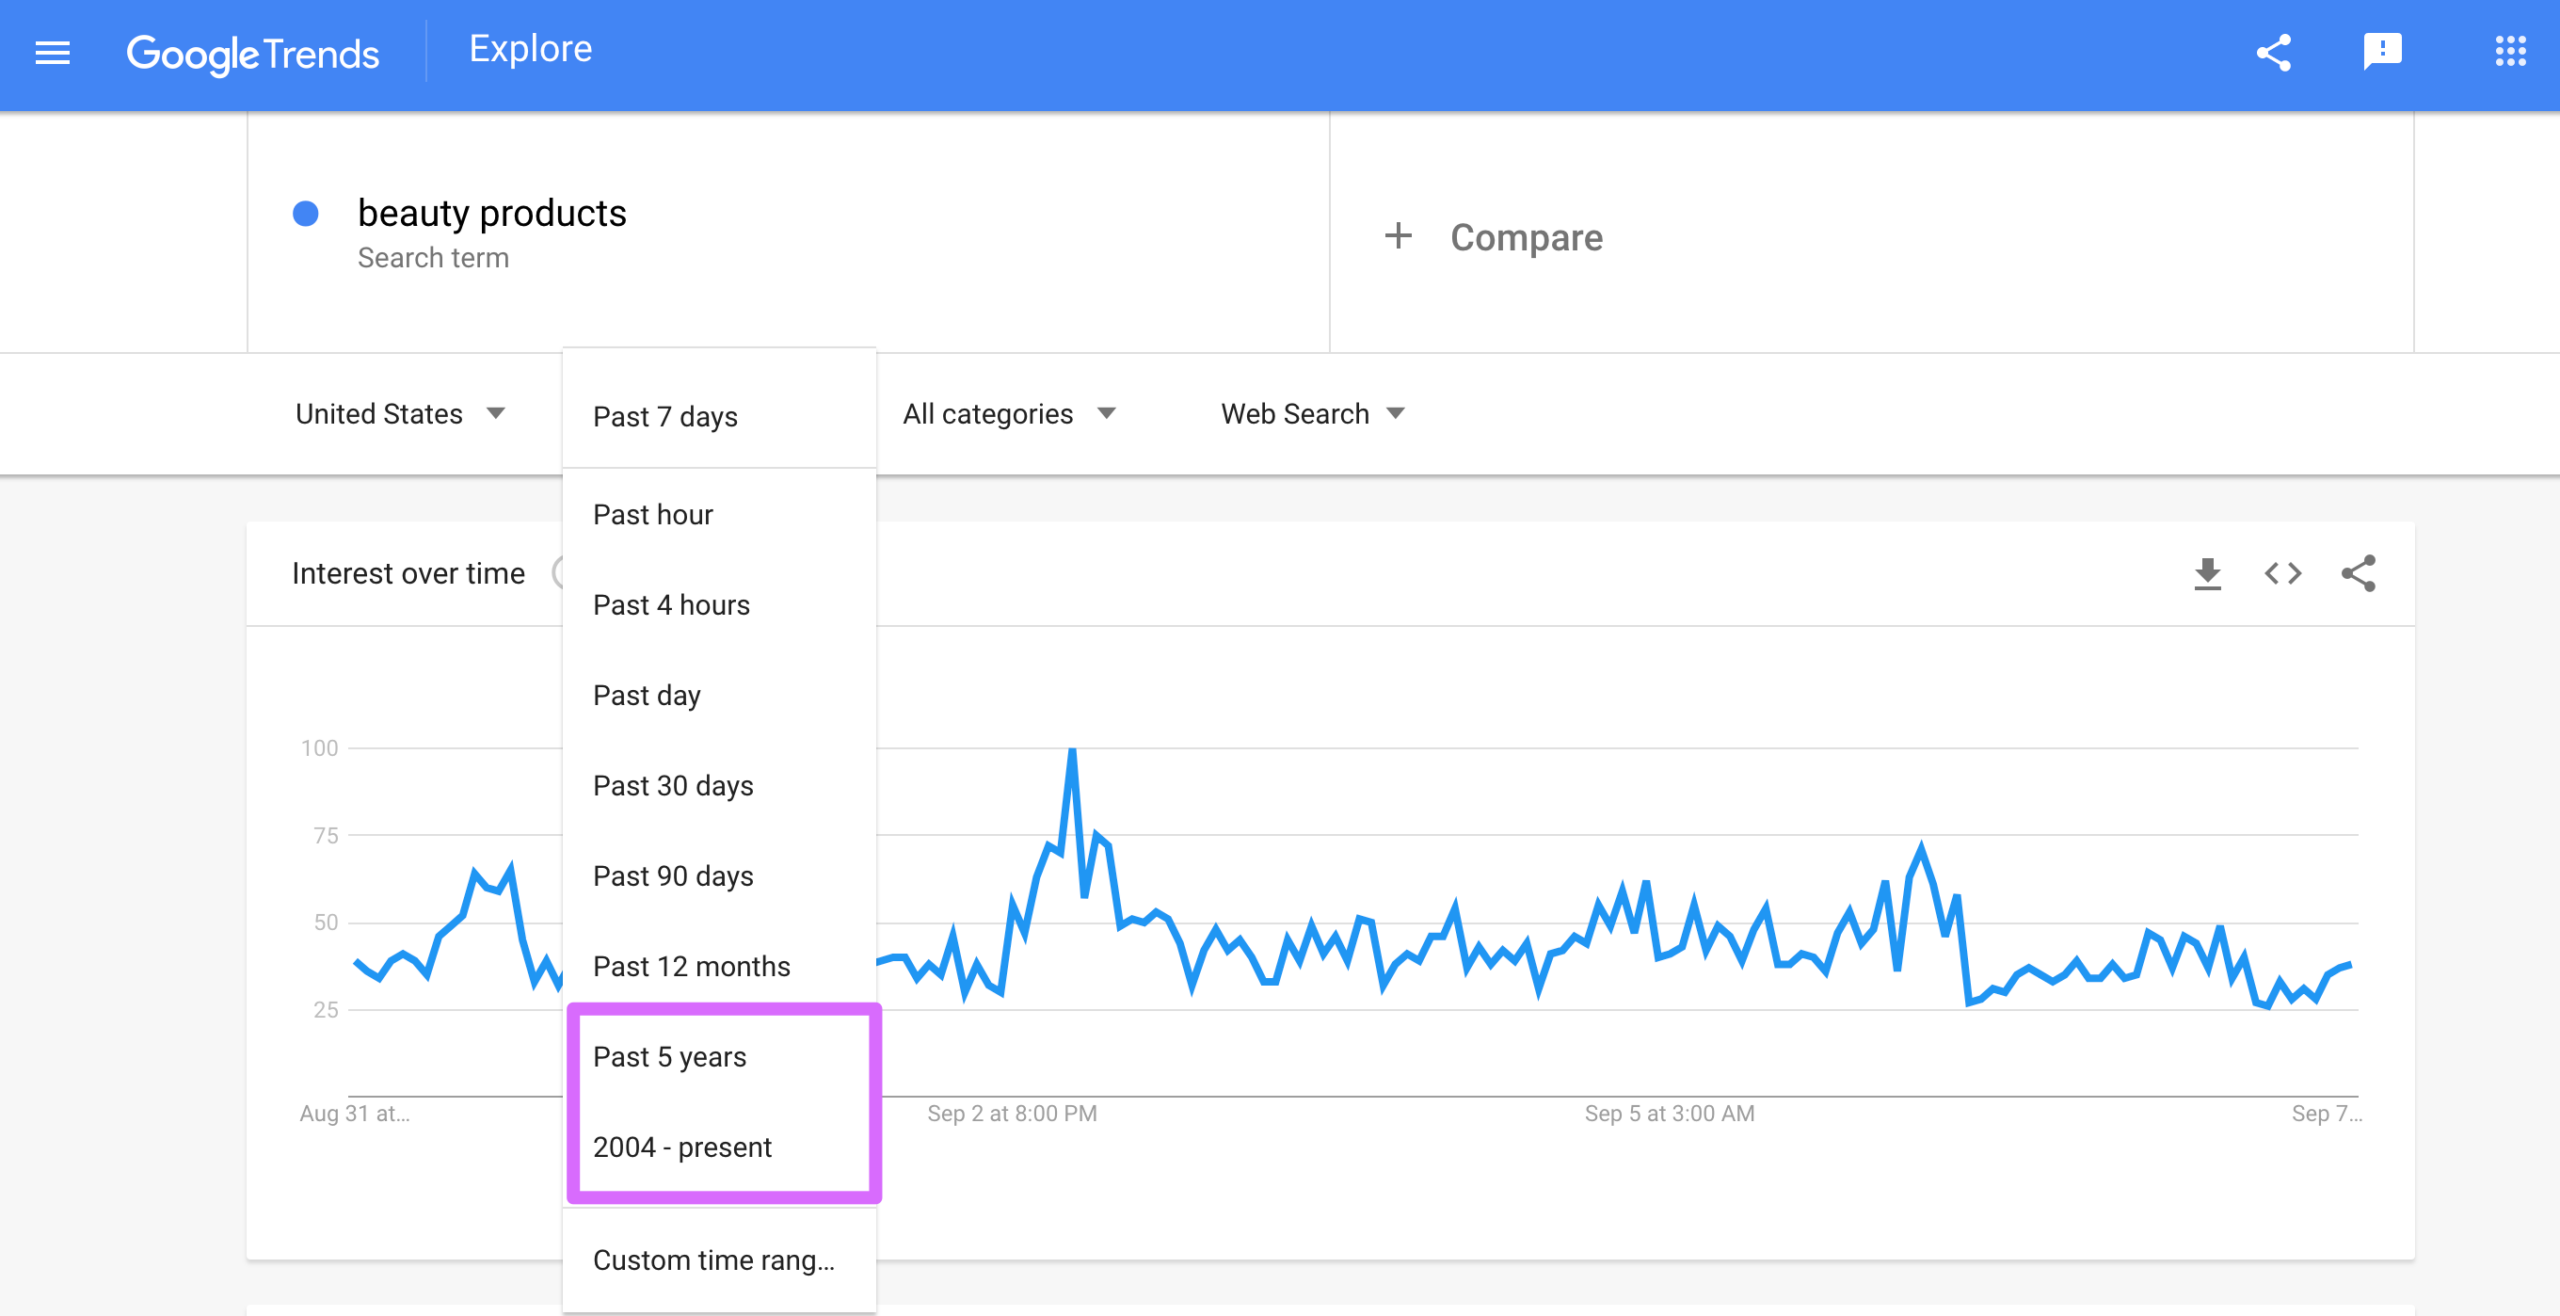 beauty products search query on google trends